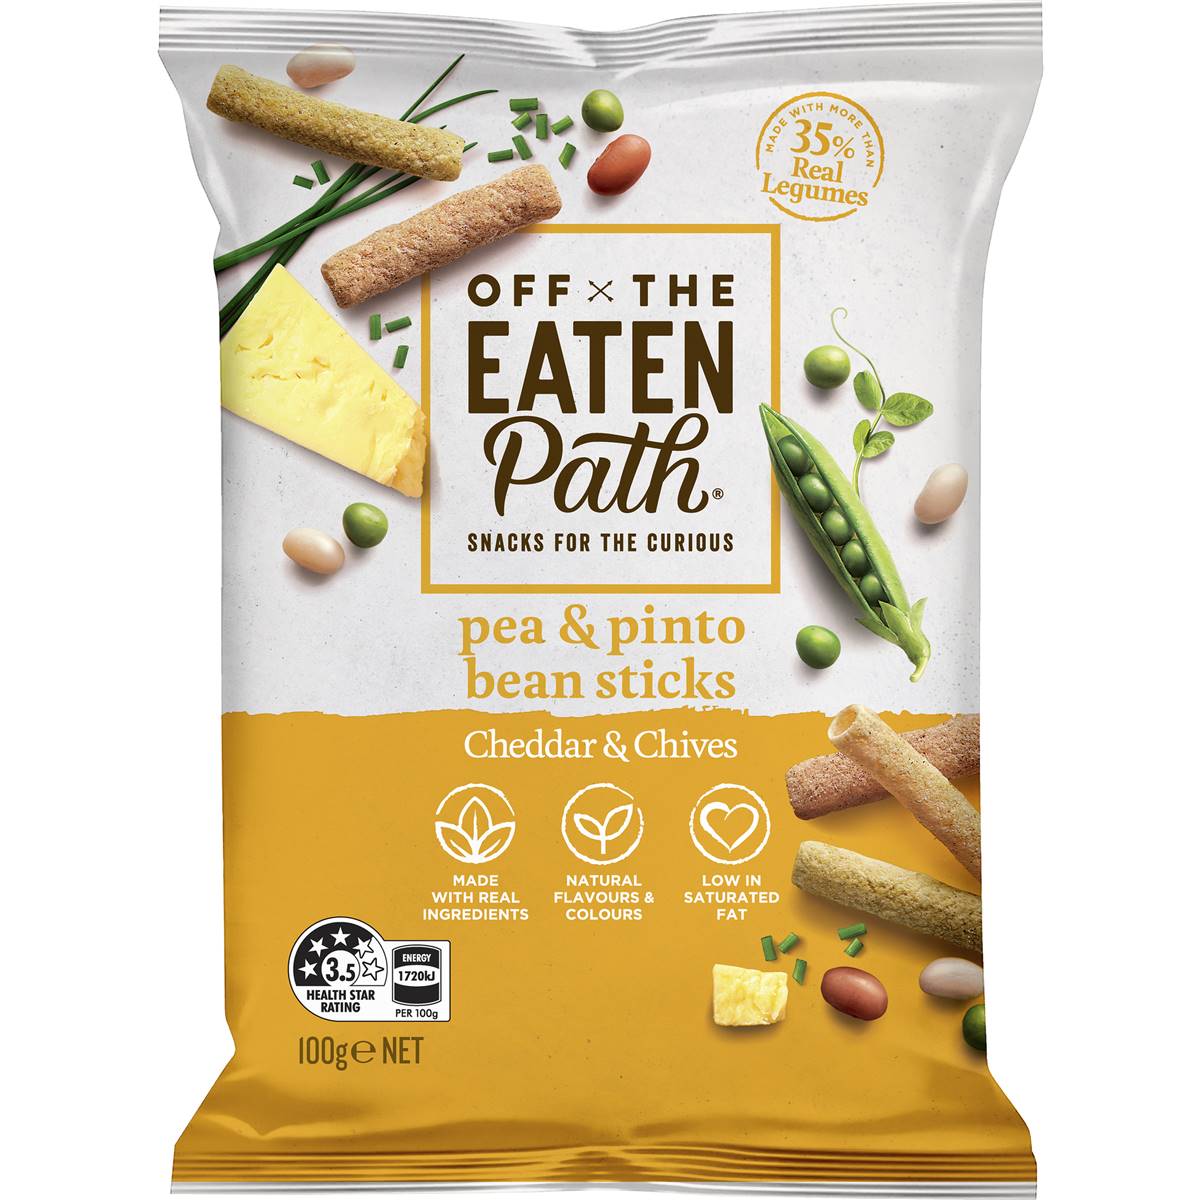 Calories in Off The Eaten Path Vegetable Chips Pea & Pinto Bean Sticks Cheddar & Chives